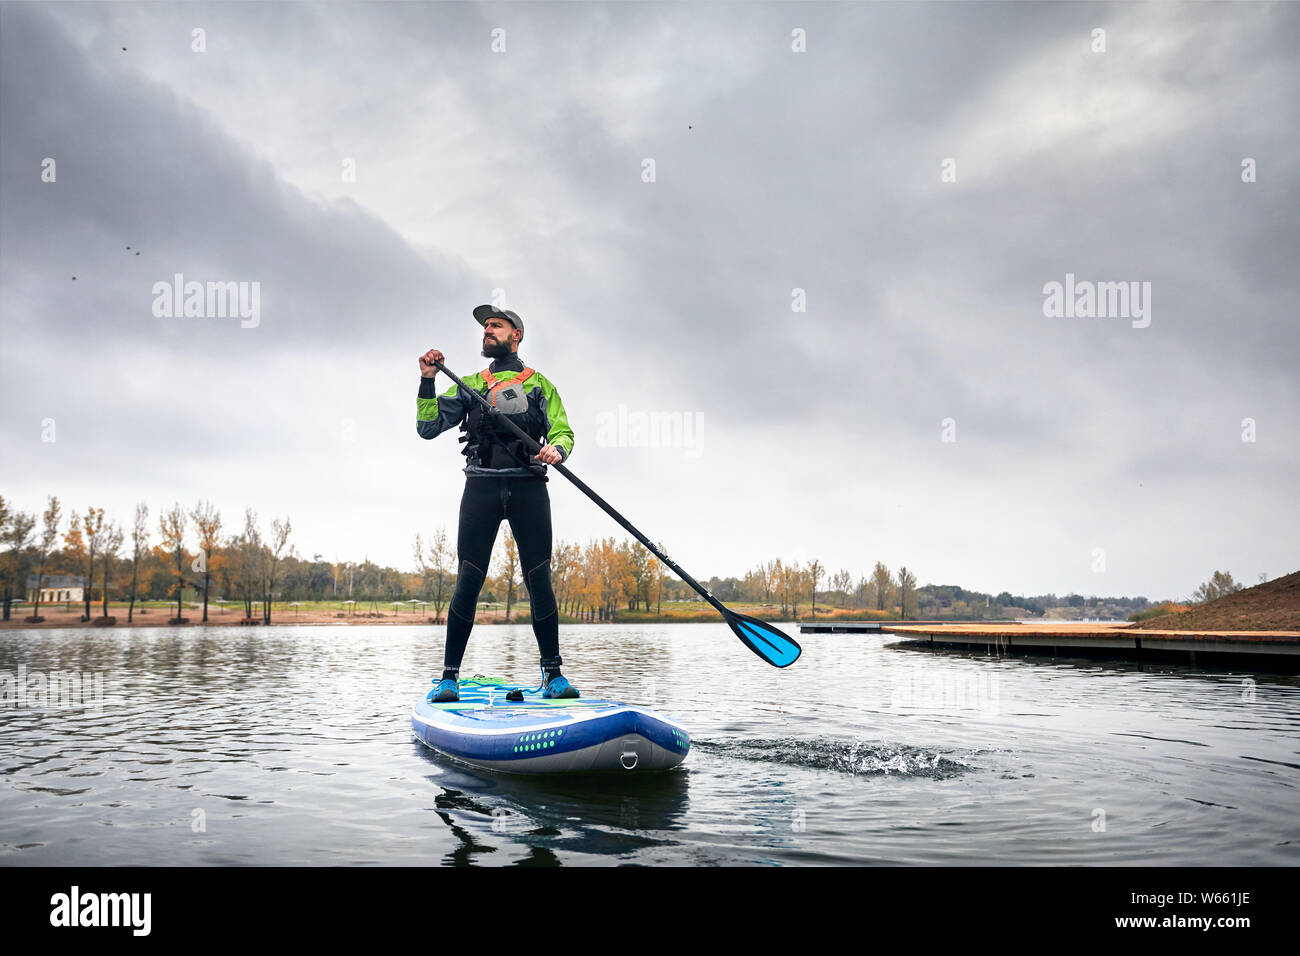 Athlete in wetsuit on paddleboard exploring the lake at cold weather against overcast sky Stock Photo